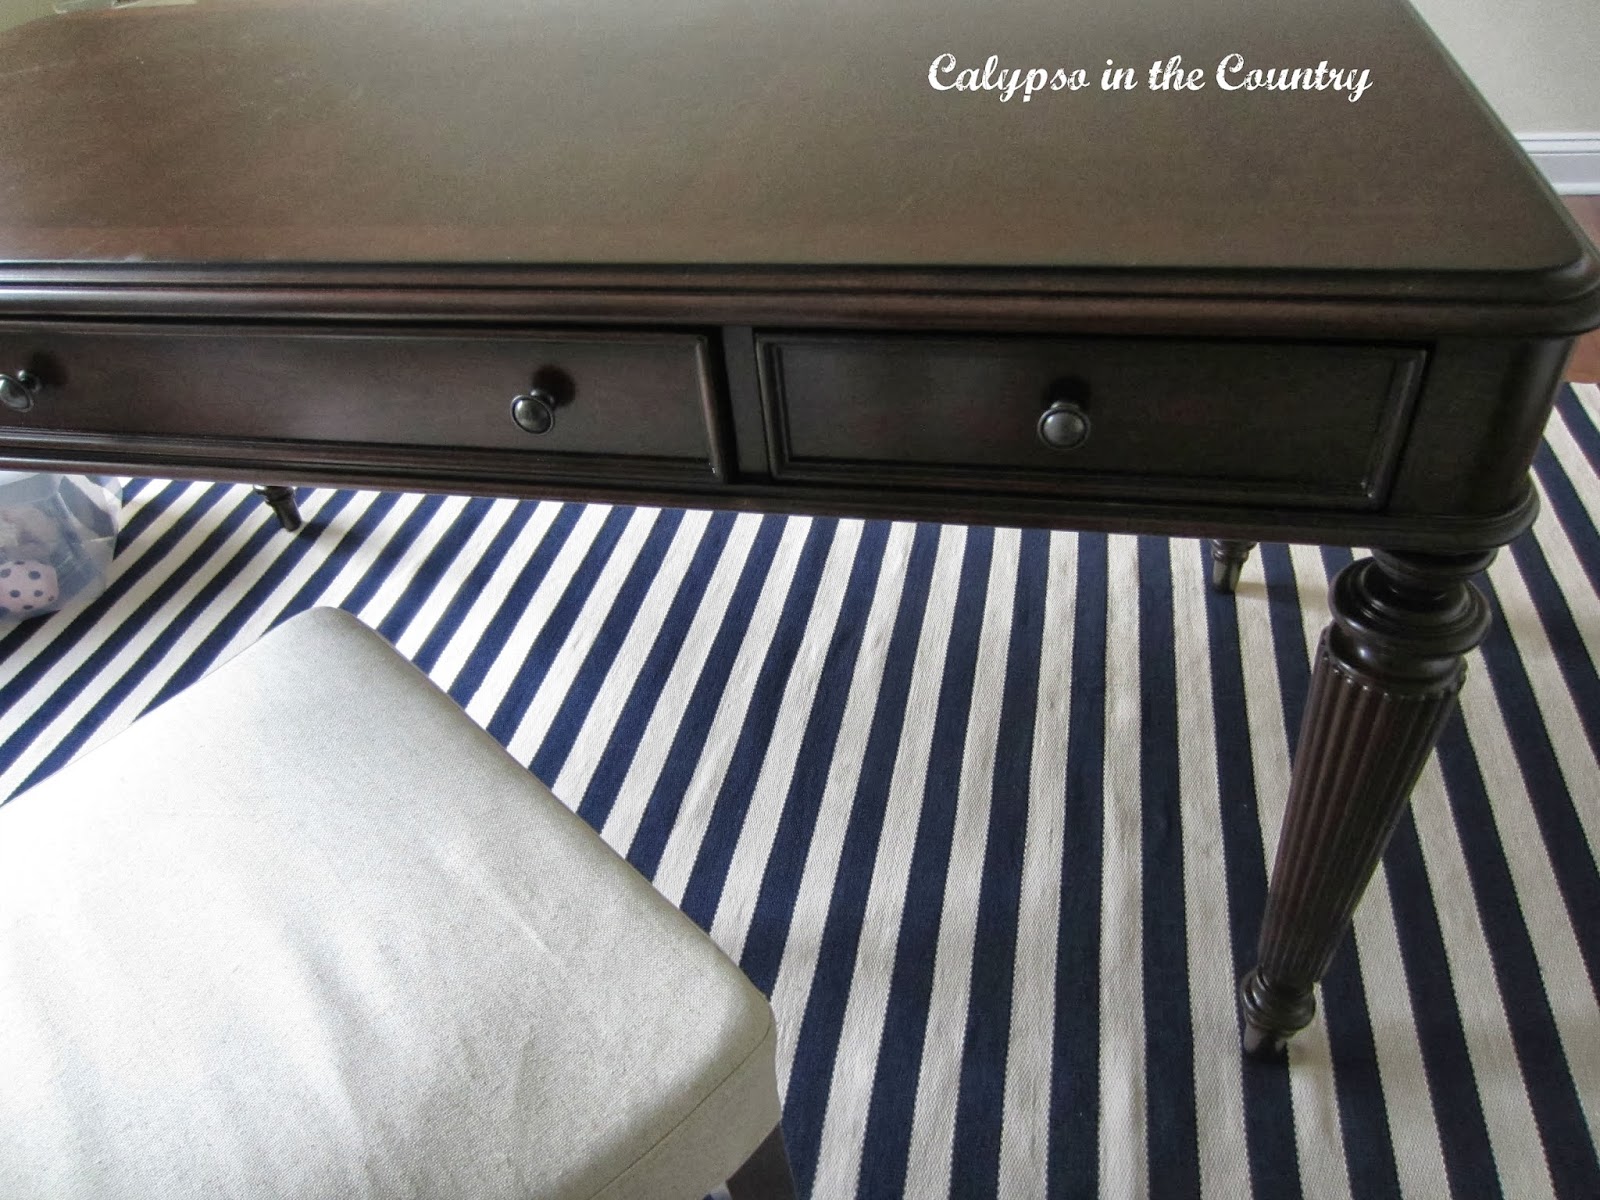 Desk and blue and white striped rug - inspired by Diane Keaton Somethings Gotta Give movie